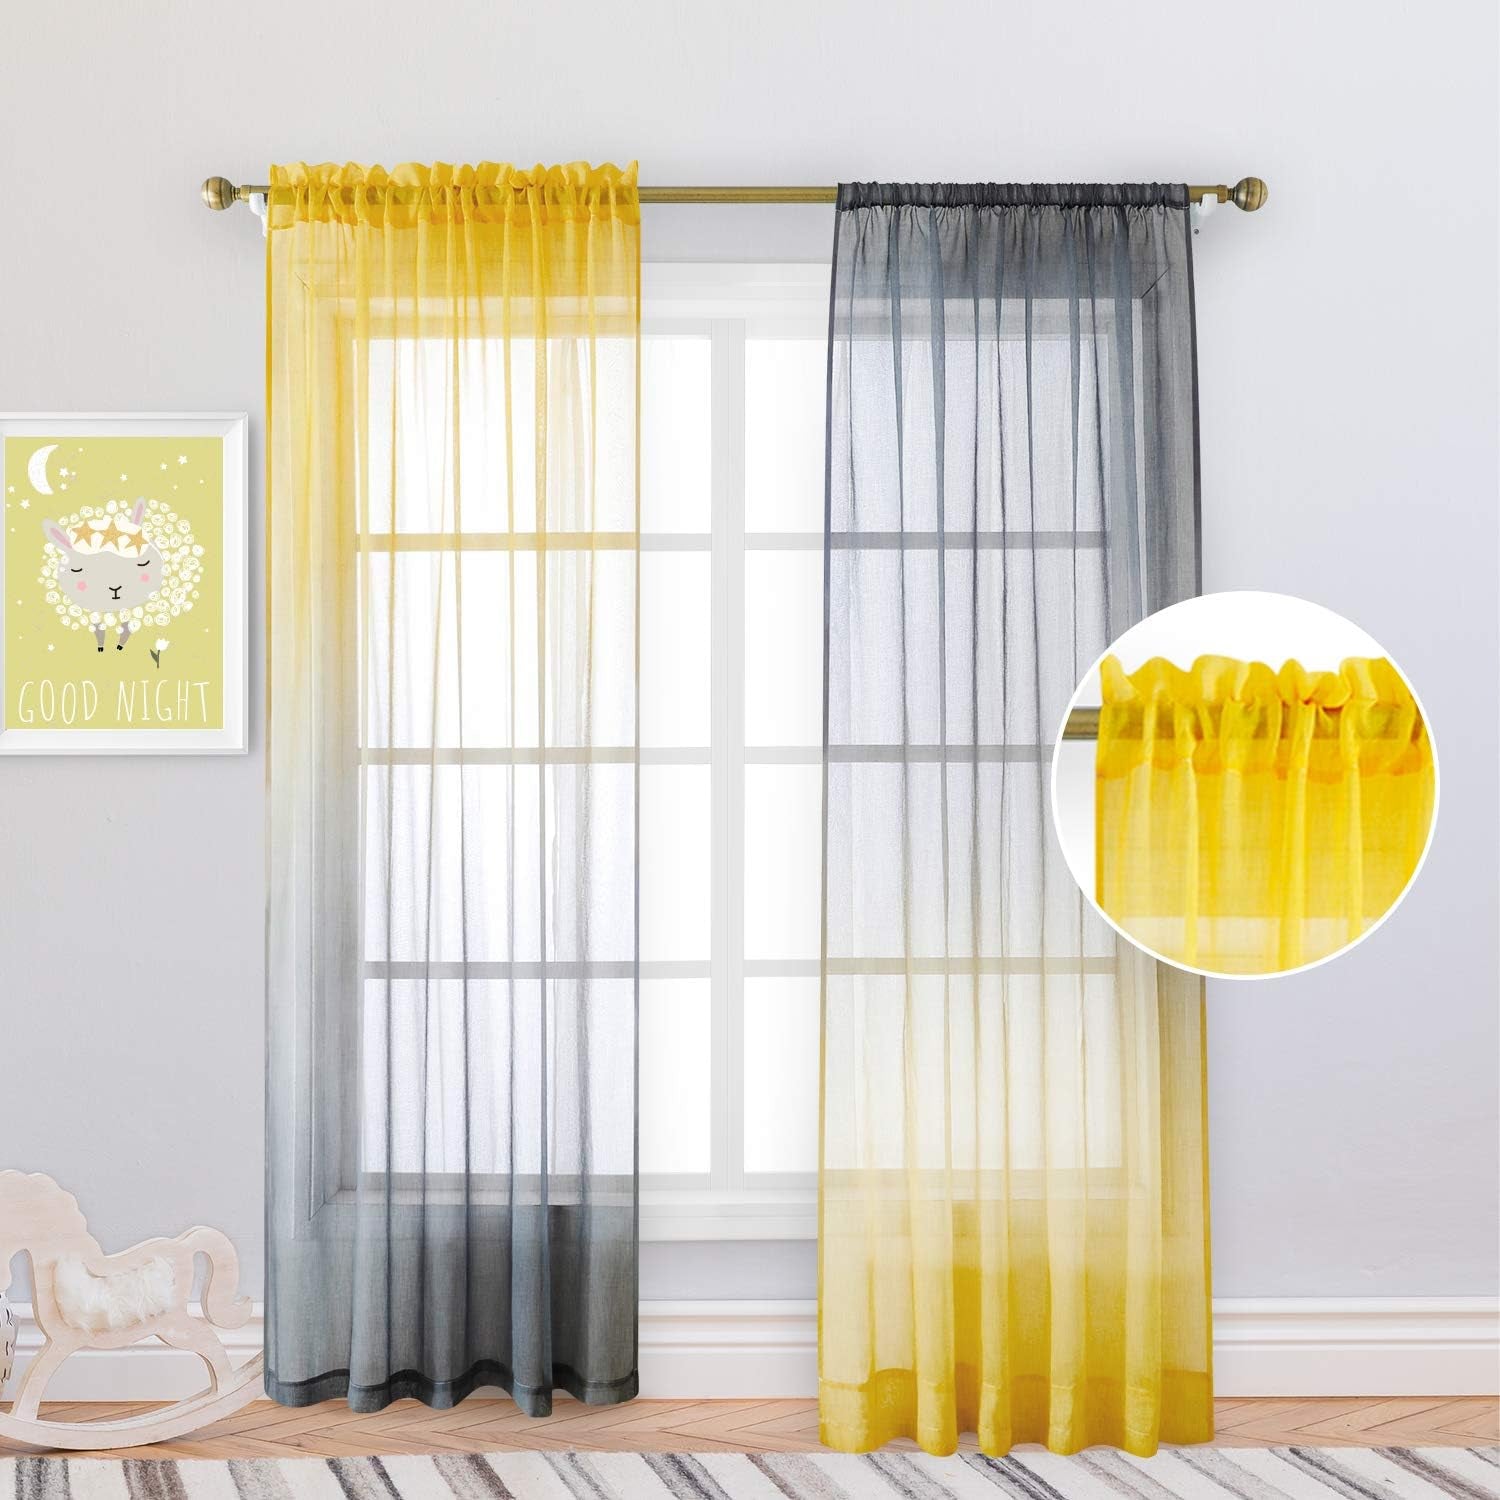 HOMEIDEAS 2 Panels Yellow and Grey Sheer Curtains for Girls Bedroom 52 X 84 Inch, Ombre Linen Curtains Rod Pocket Drapes for Nursery Kids Window and Living Room  HOMEIDEAS   